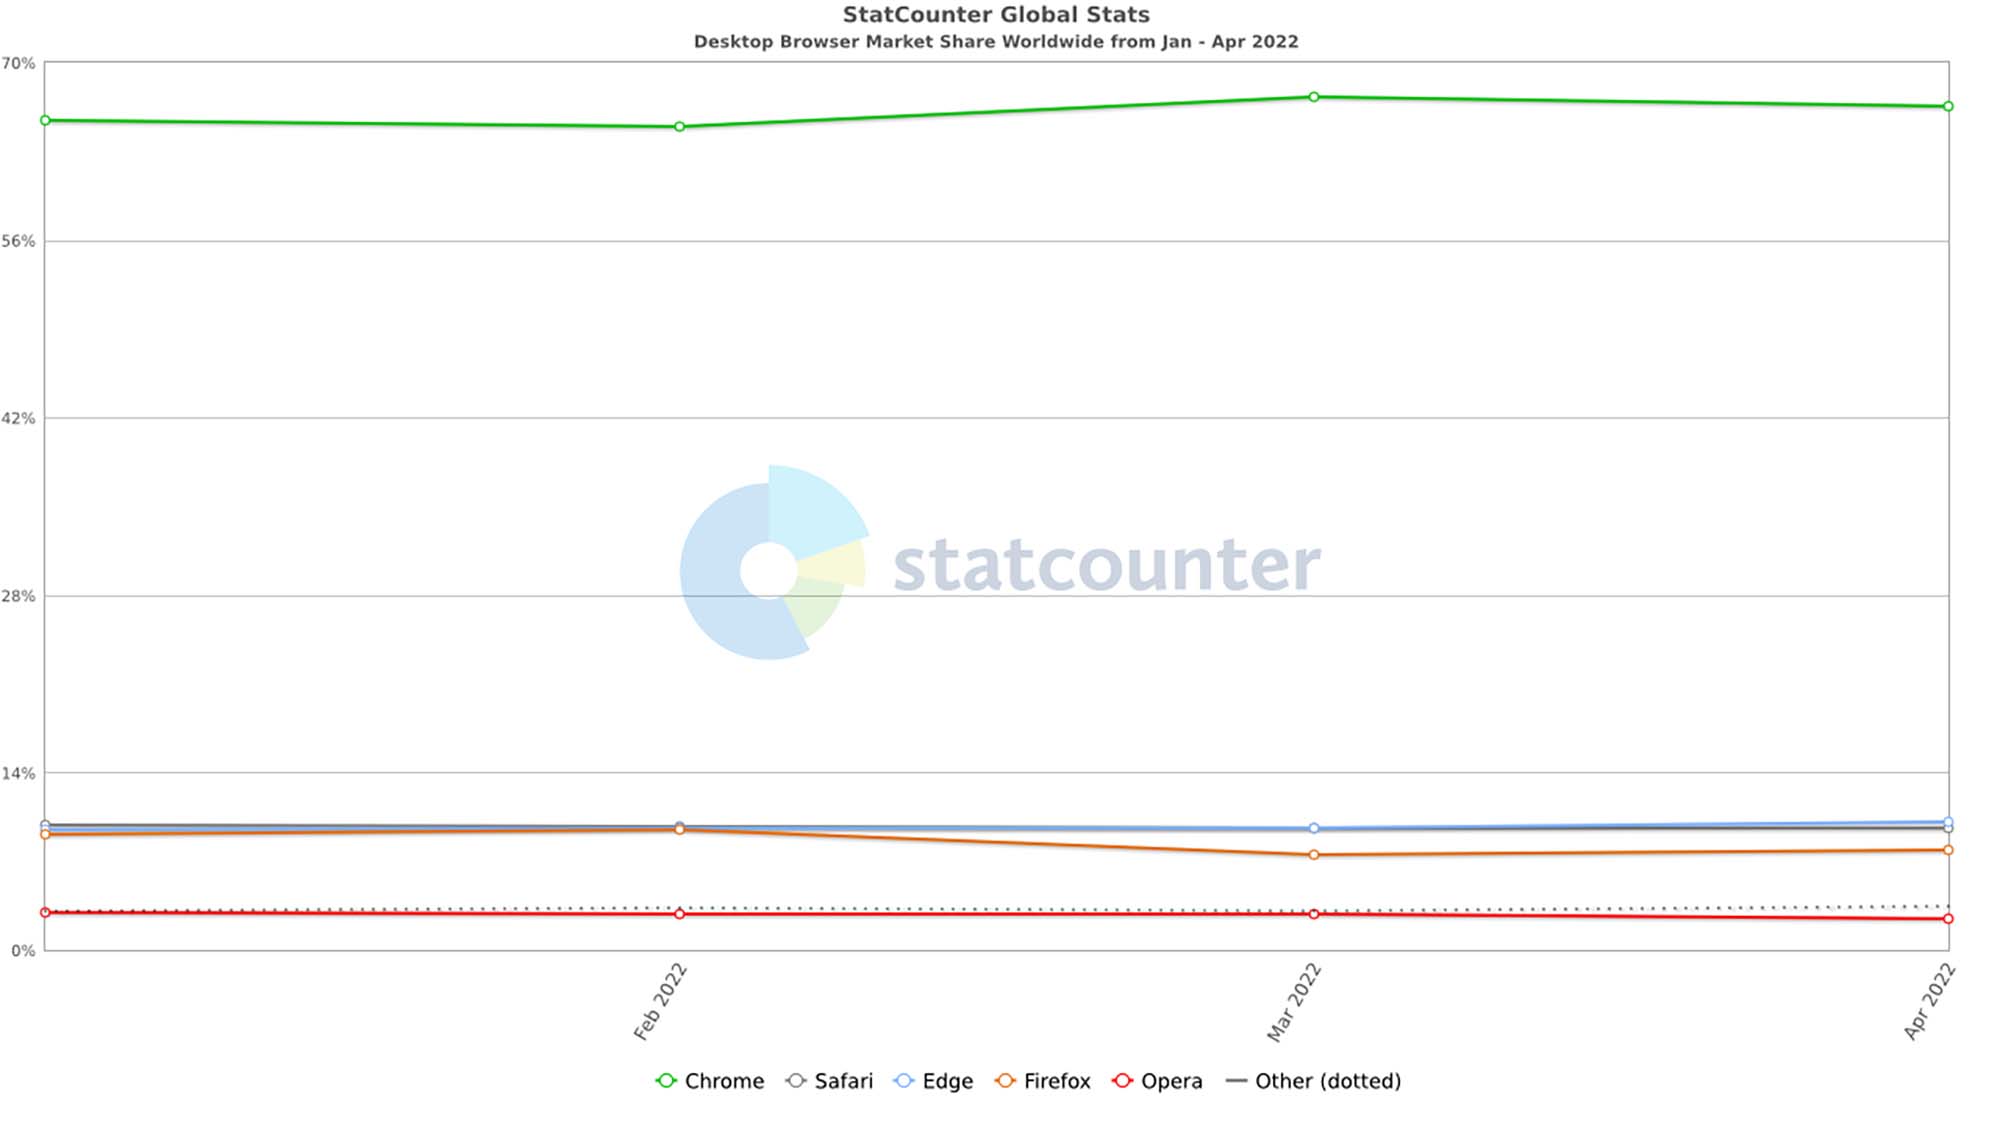 A graph showing the relative market shares of competing web browsers